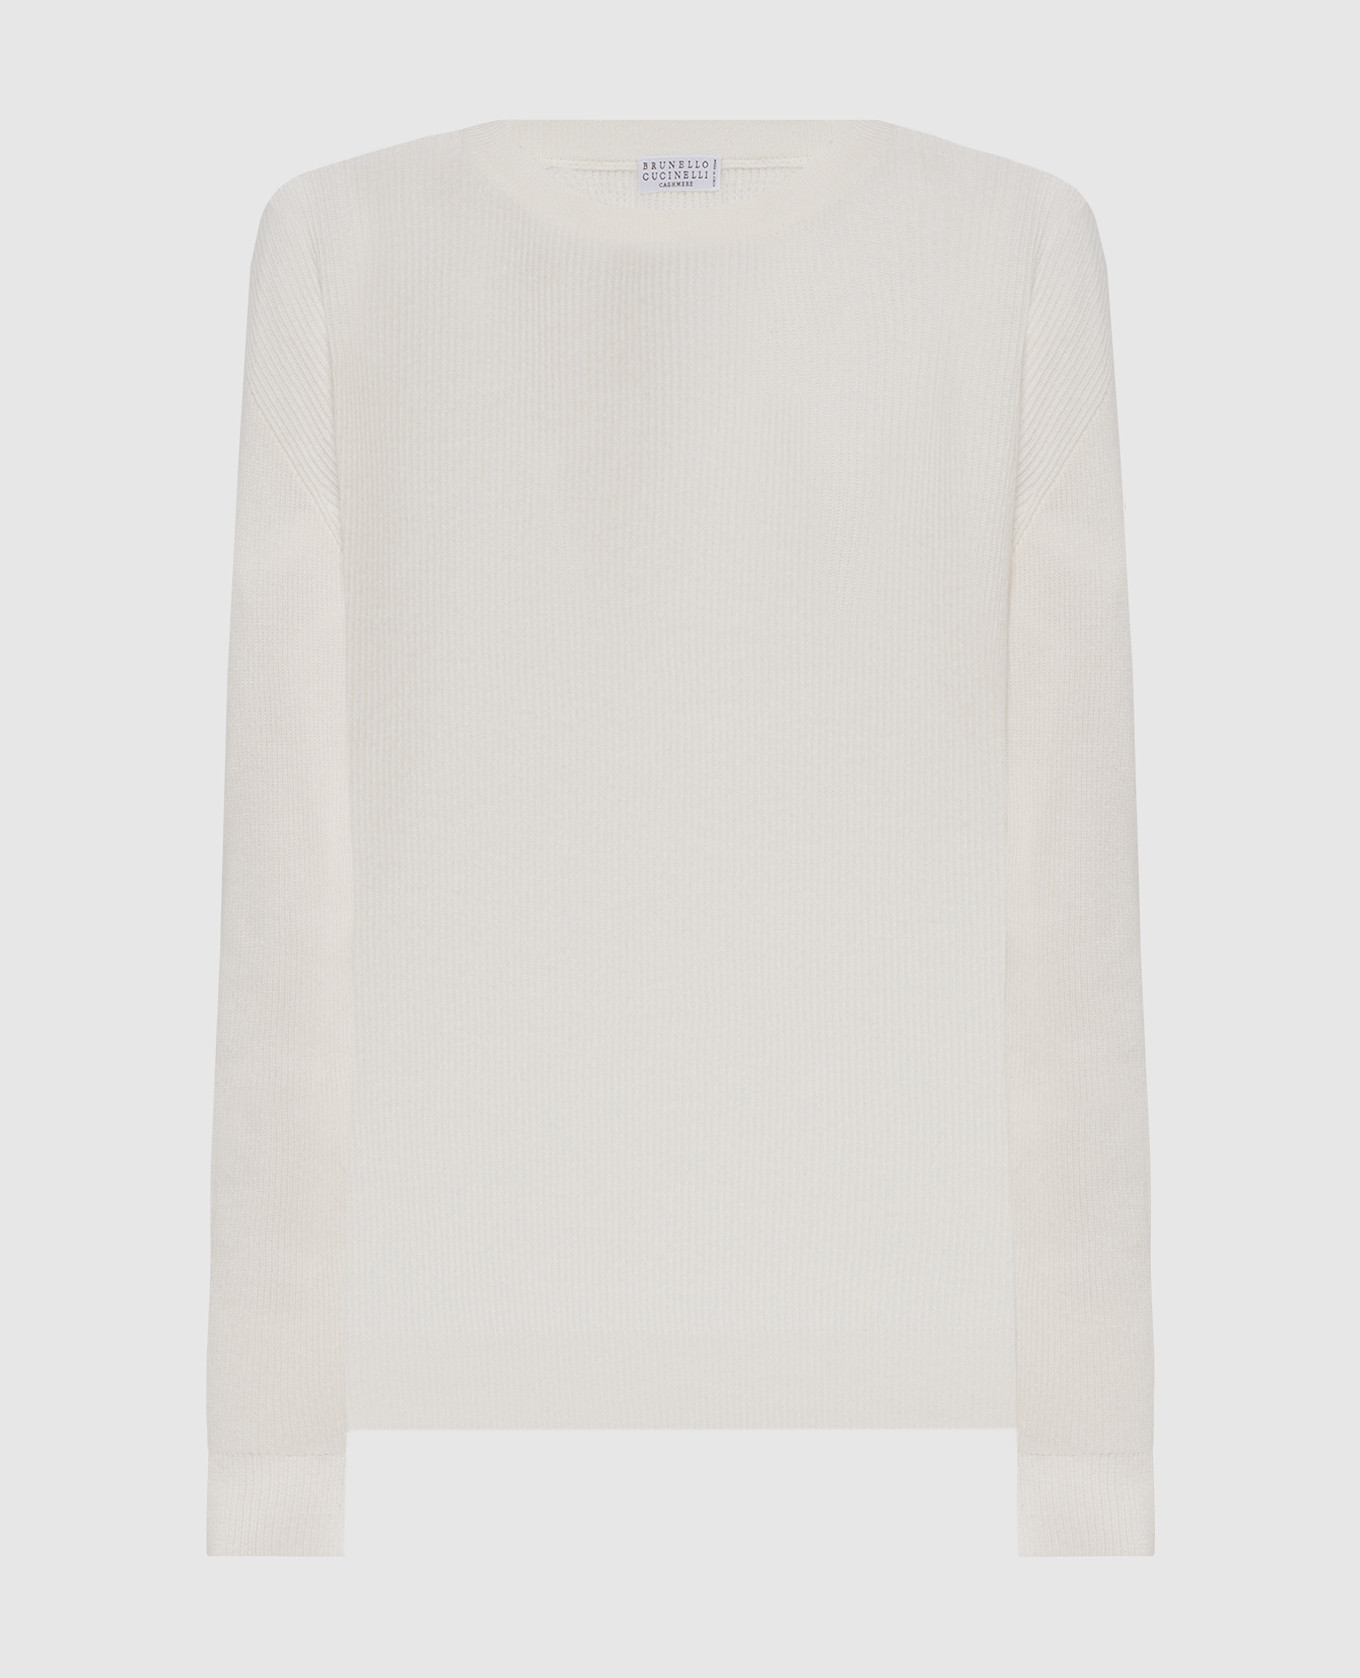 White ribbed cashmere sweater with monil chain